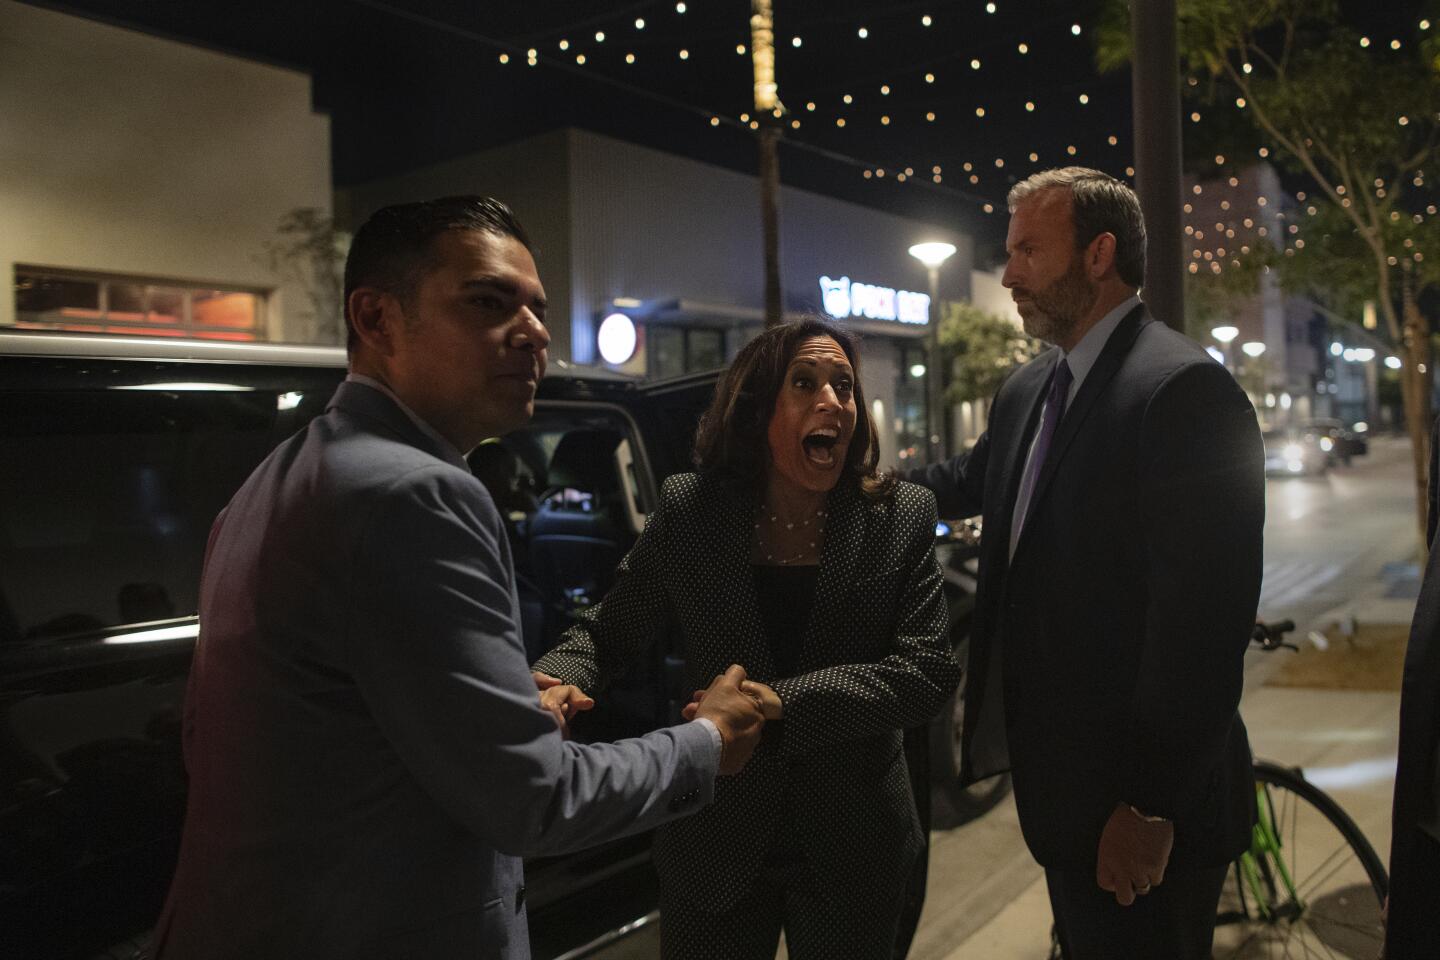 Kamala Harris recognizes a friend in the crowd during a visit to Long Beach.